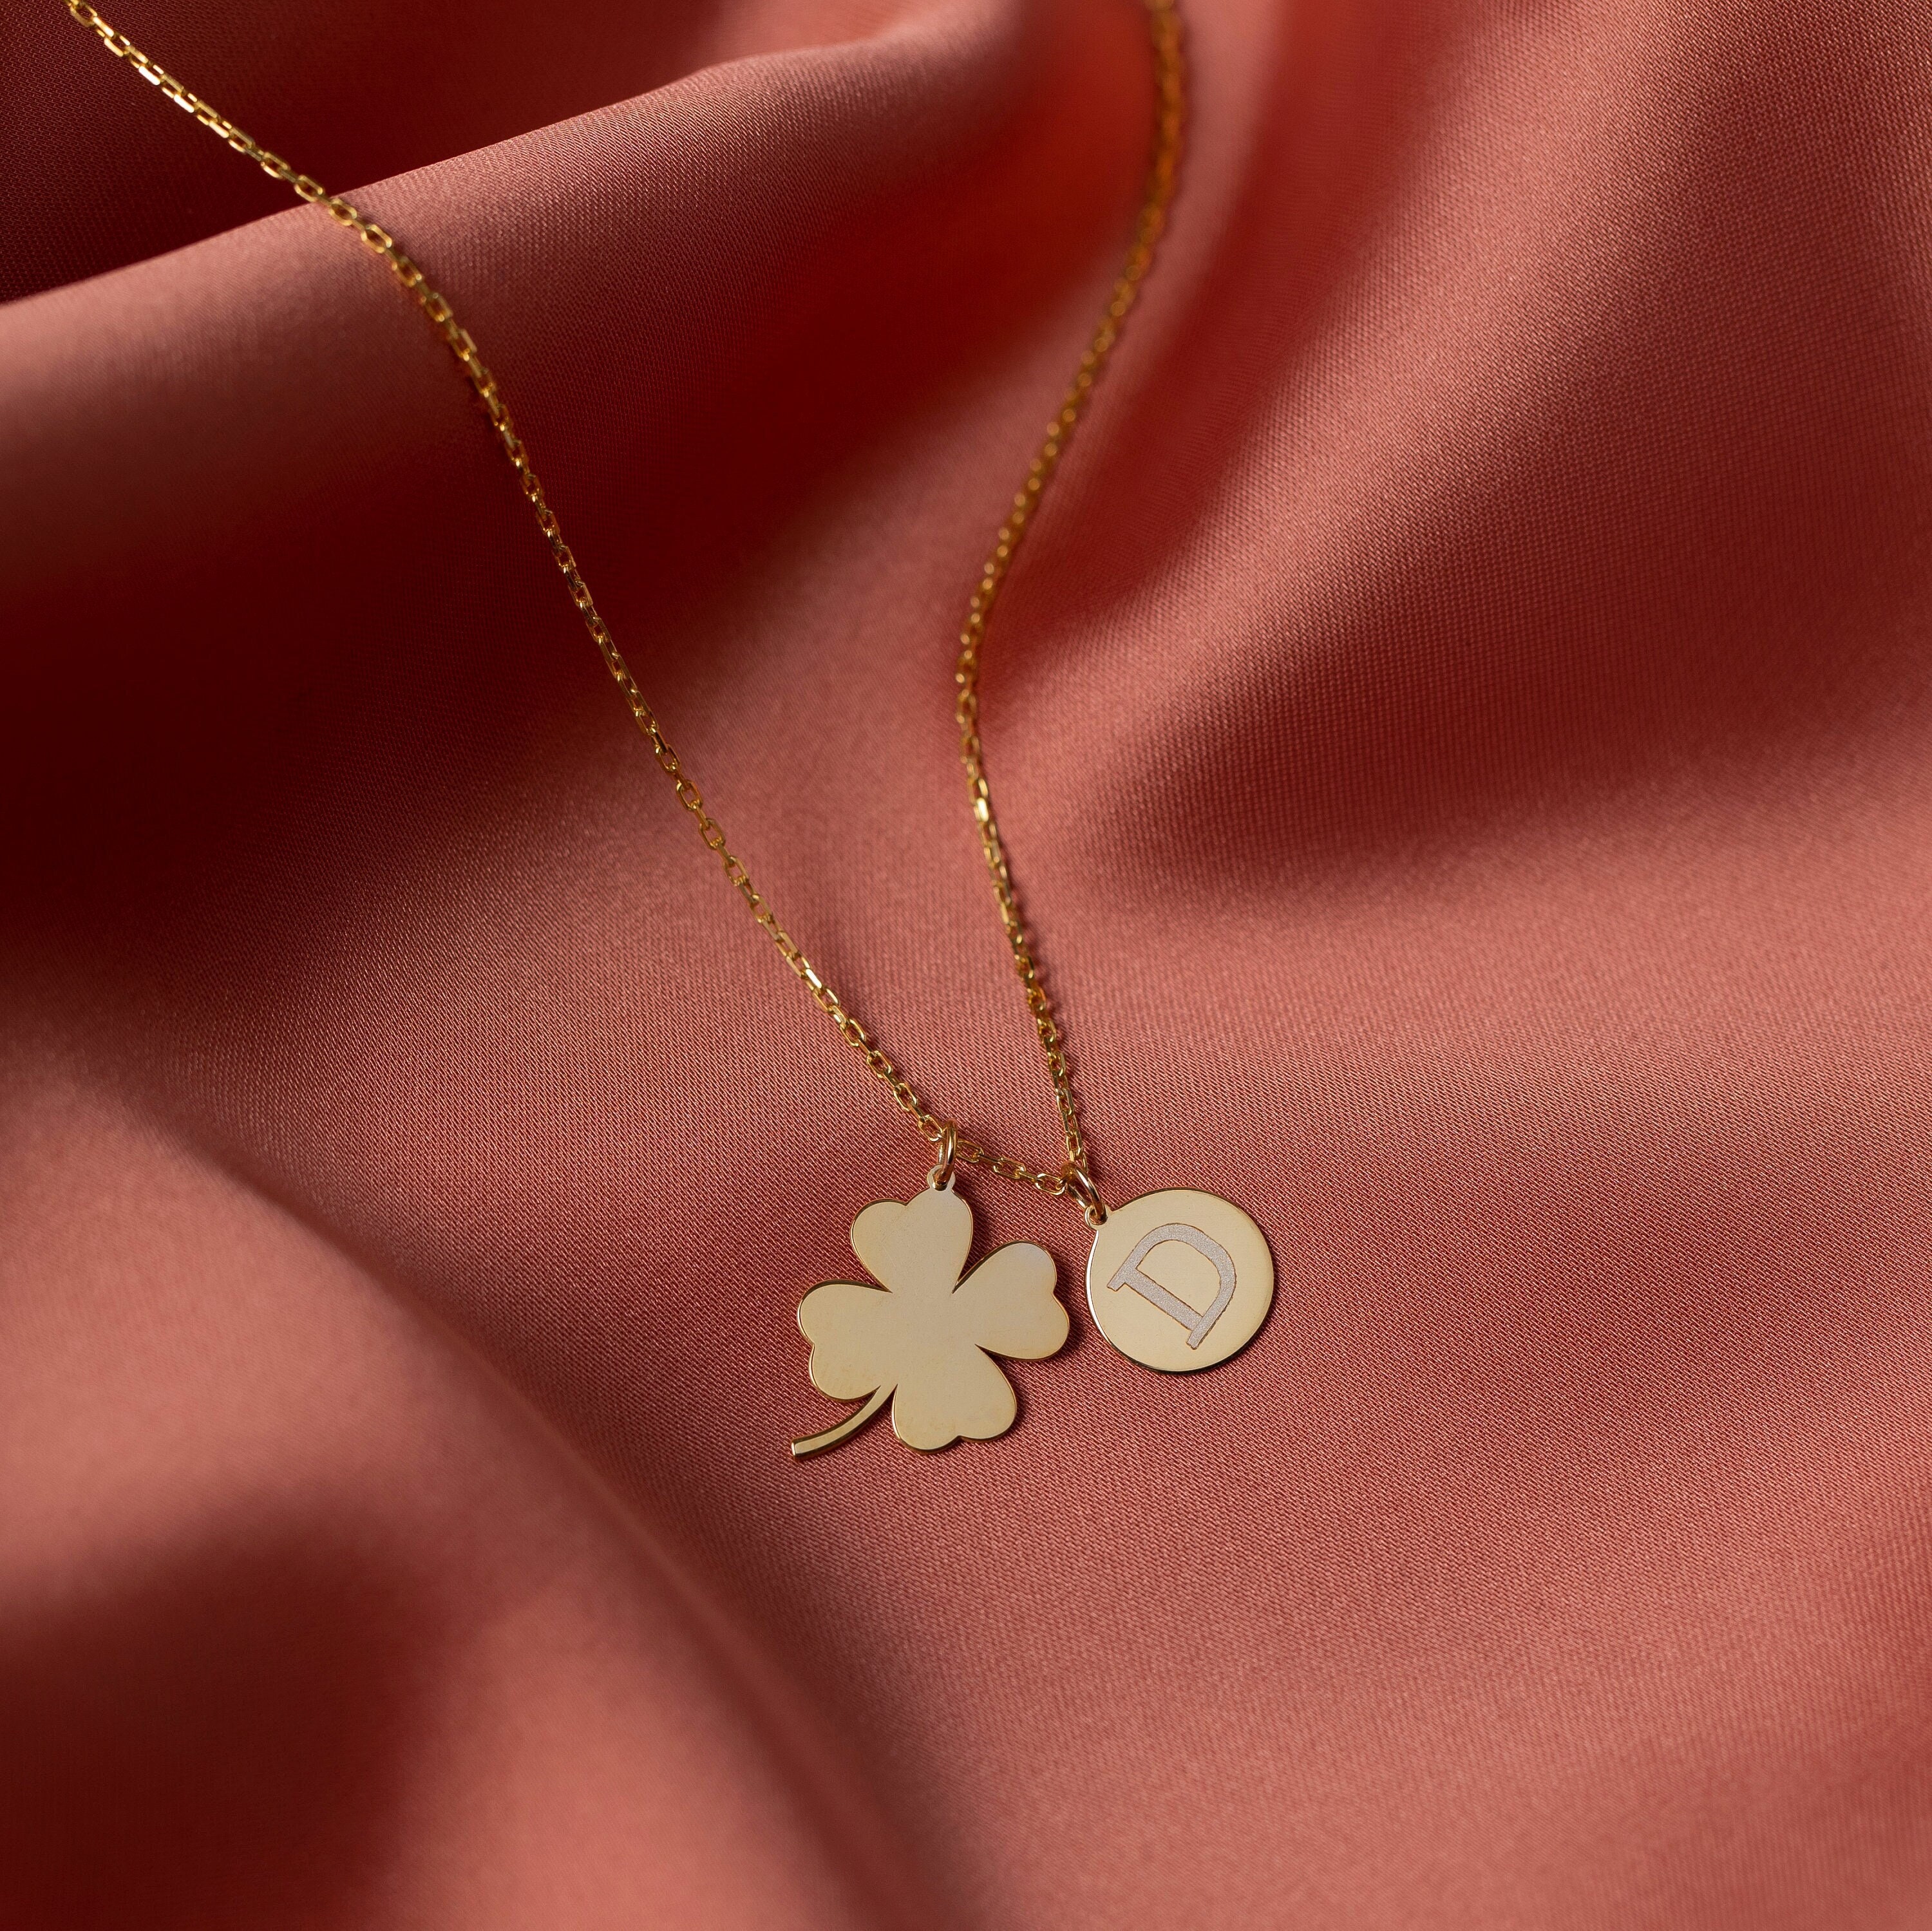 Tiny and Dainty Sterling Silver Necklace Four Leaf Clover Necklace, Lucky  Charm Necklace, Irish Luck Necklace, St. Patrick's Day Gift - Etsy